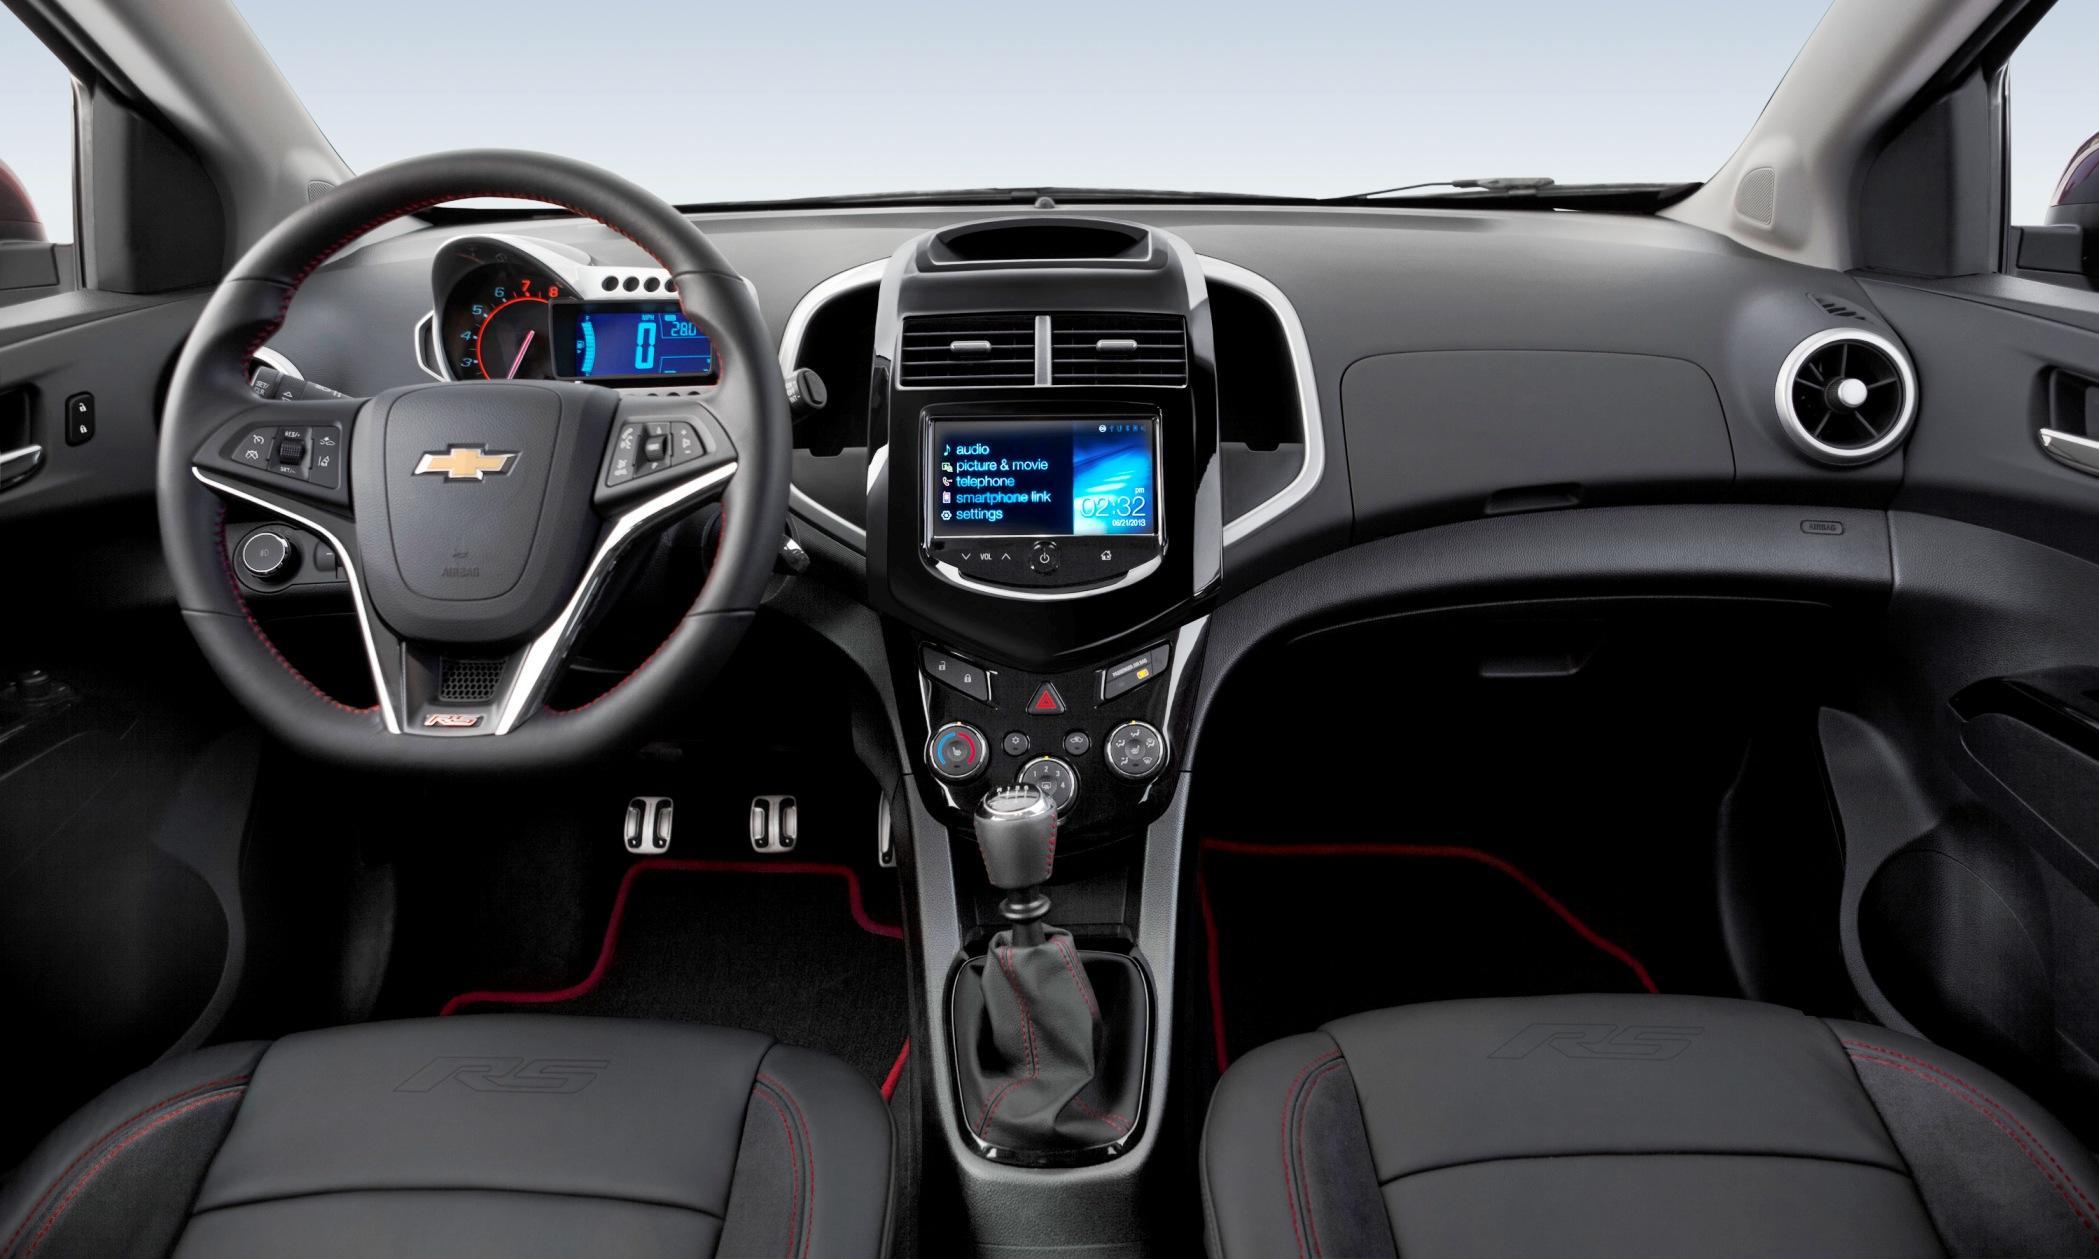 2015 Chevy Sonic Rs Sedan And Ltz Dusk Join Cool Rs Hatch